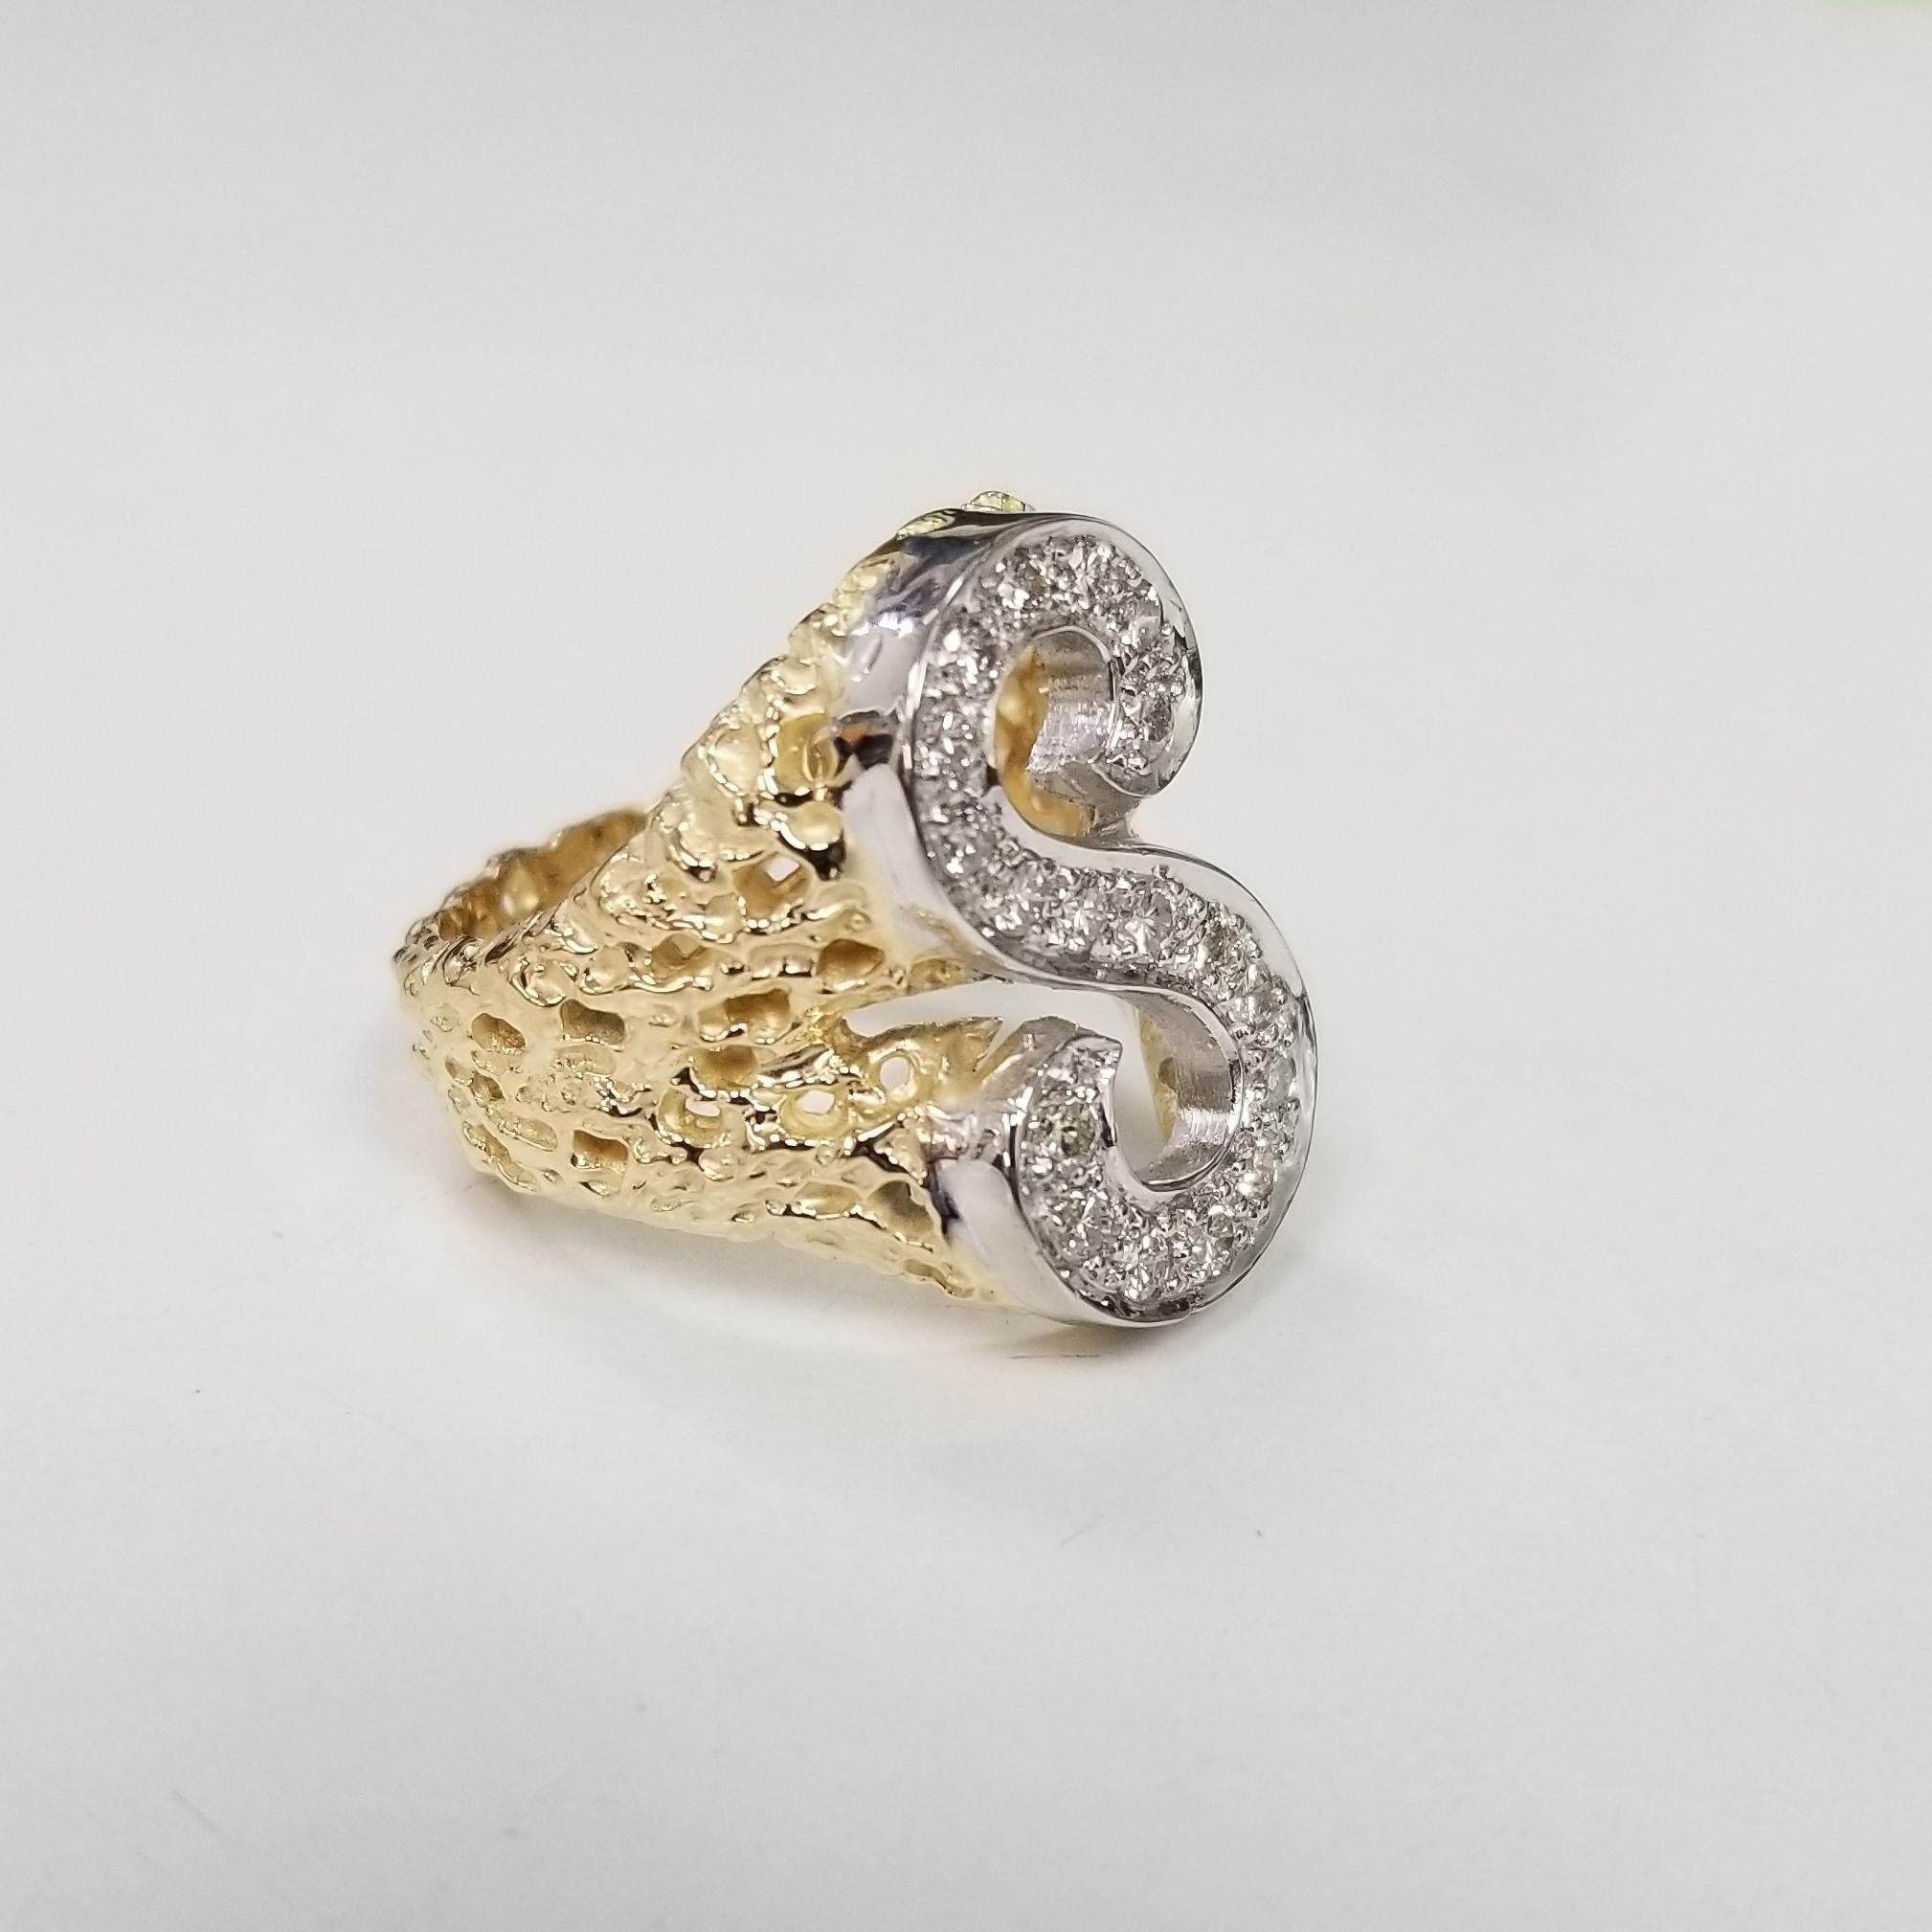 Vintage 1970's 14k yellow gold Nugget diamond initial 